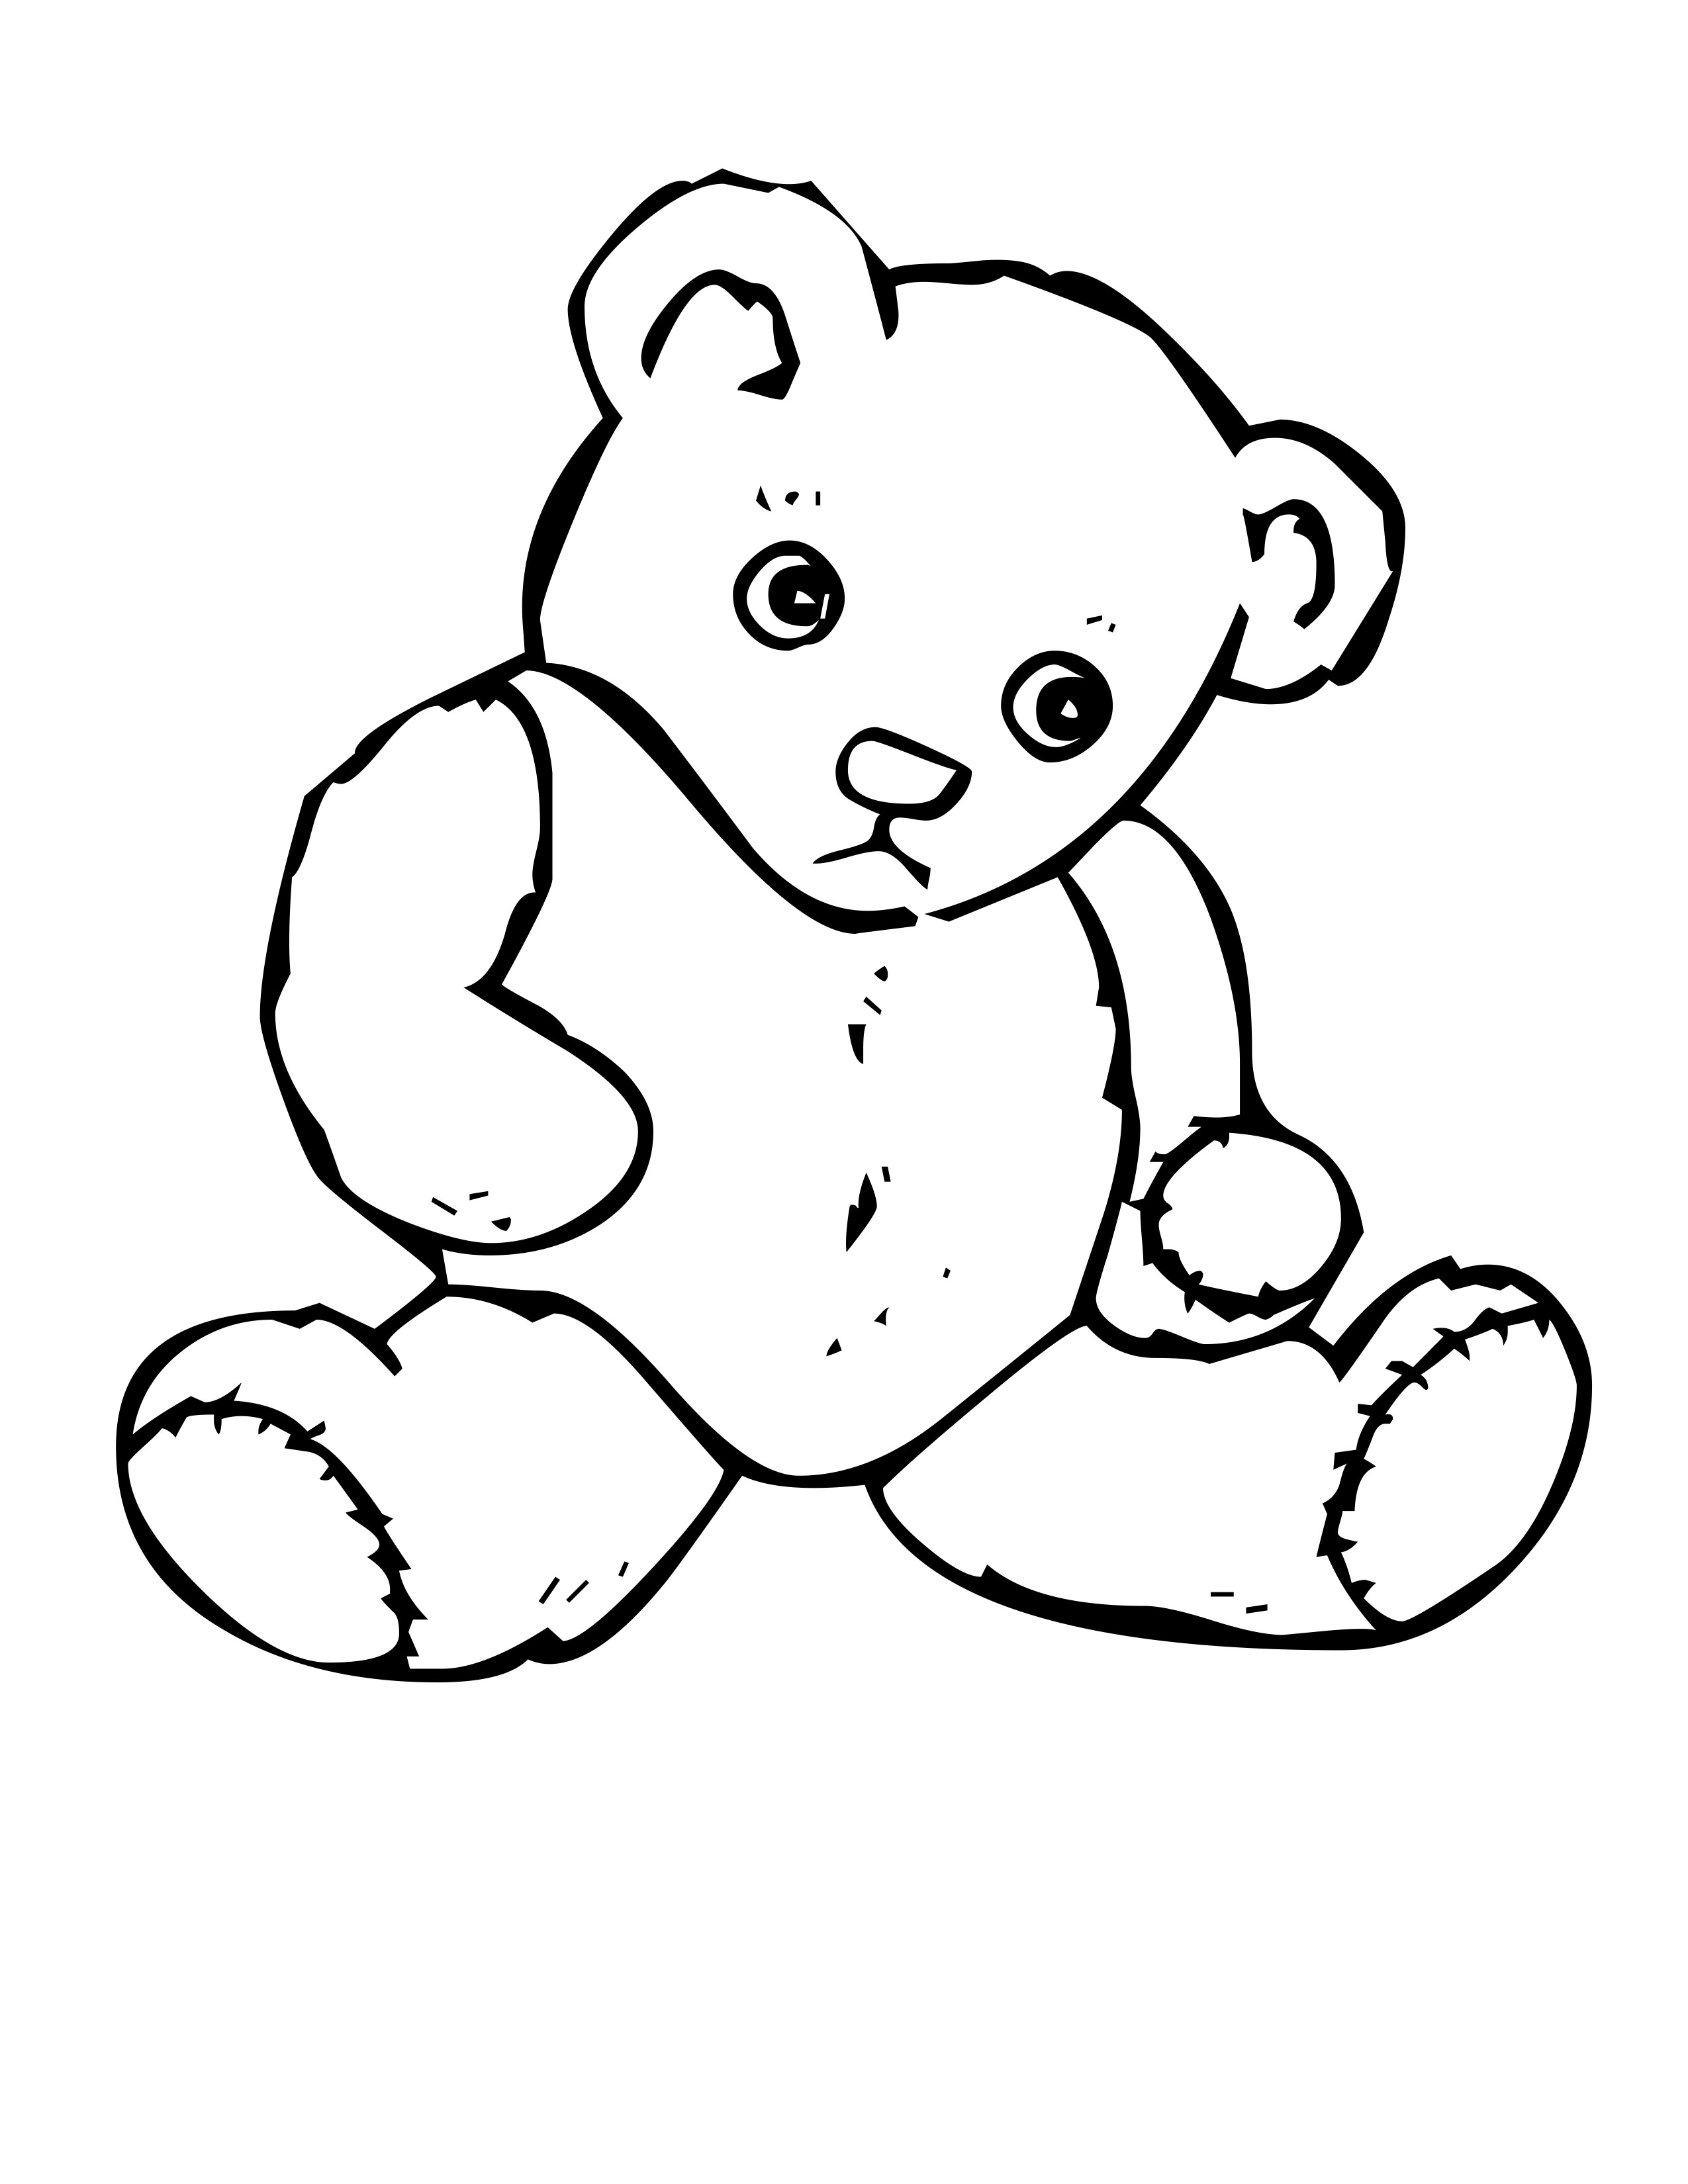 free-printable-teddy-bear-coloring-pages-for-kids